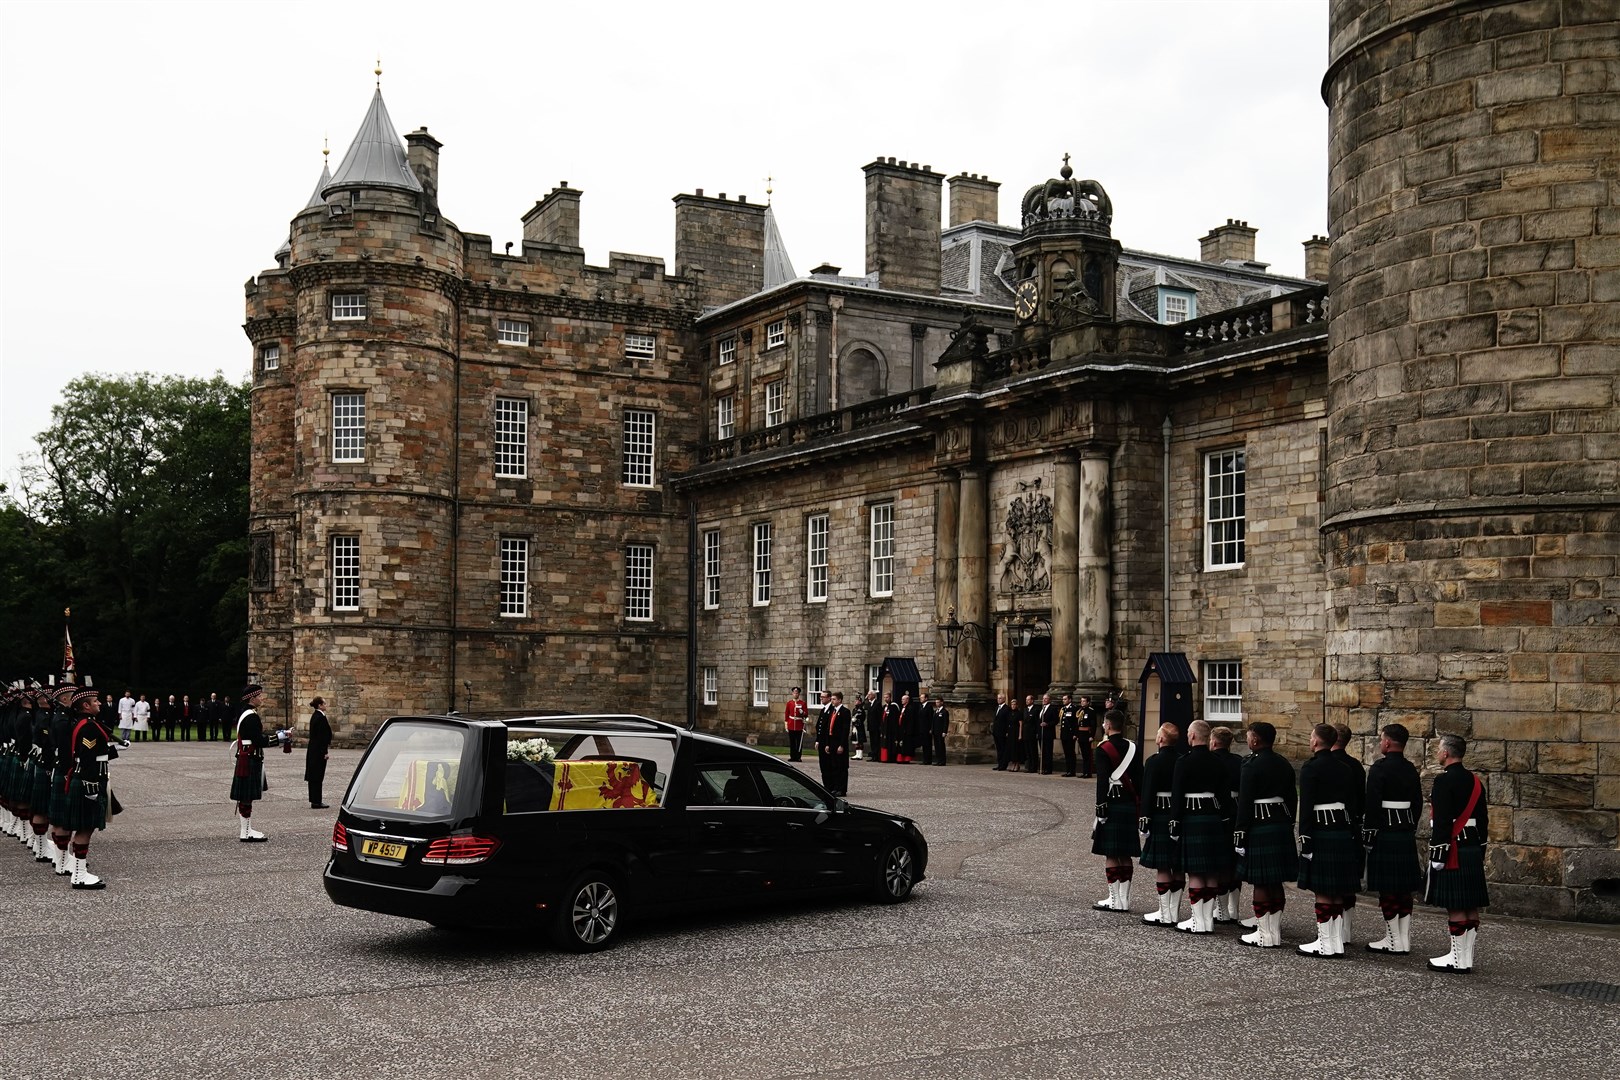 The hearse carrying the coffin of the Queen completes its journey from Balmoral to the Palace of Holyroodhouse in Edinburgh (Aaron Chown/PA)